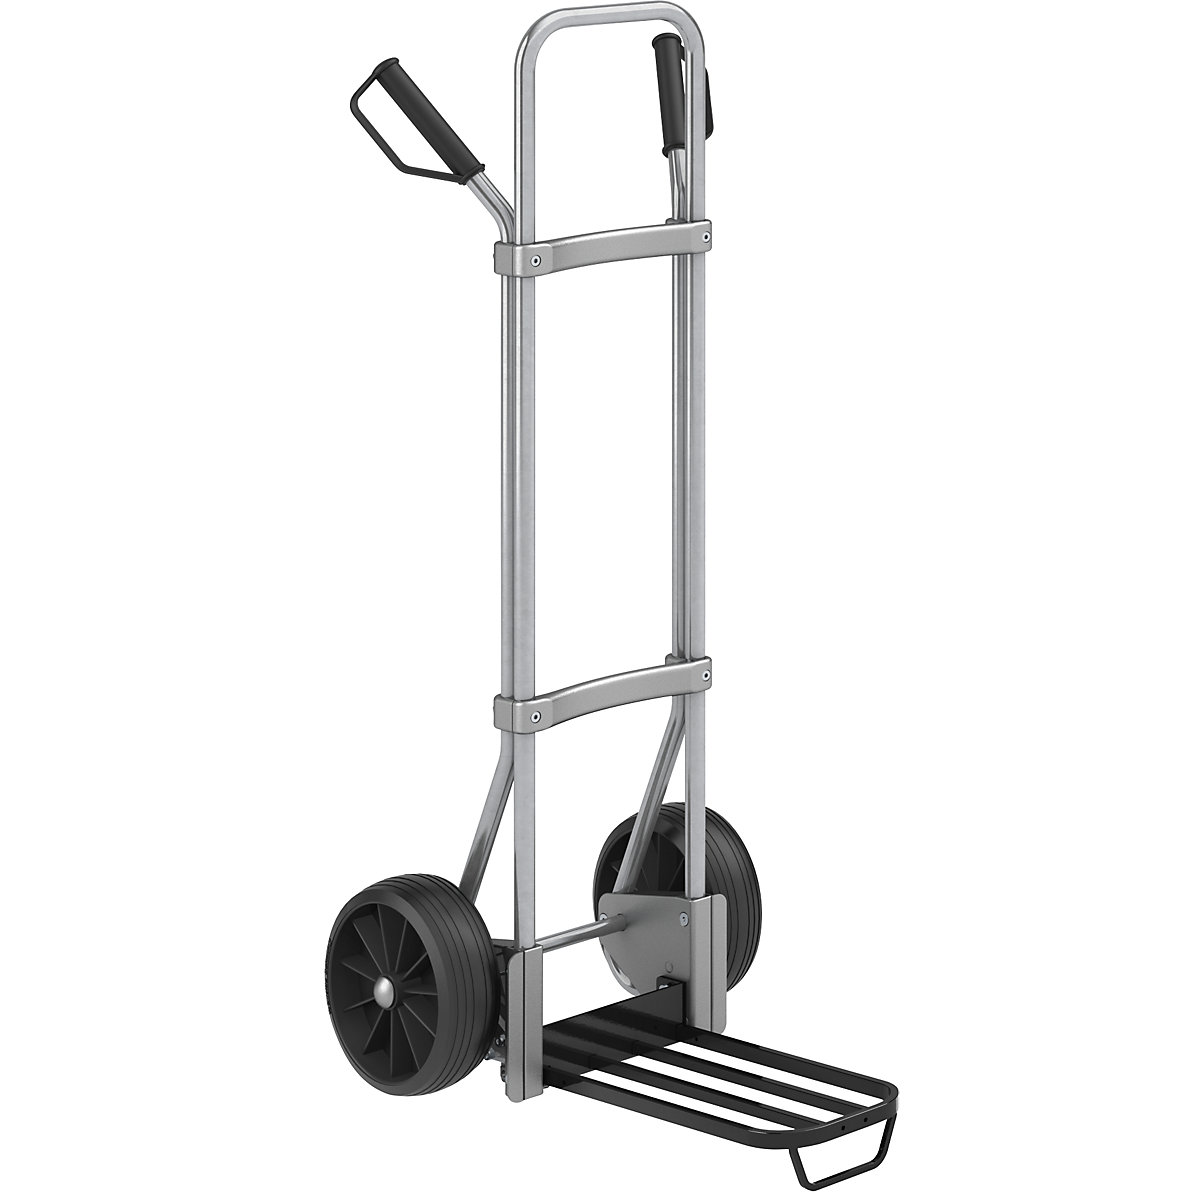 Sack truck, zinc plated – eurokraft pro, parcel footplate WxD 430 x 250 mm, black, with handle, solid rubber tyres-1